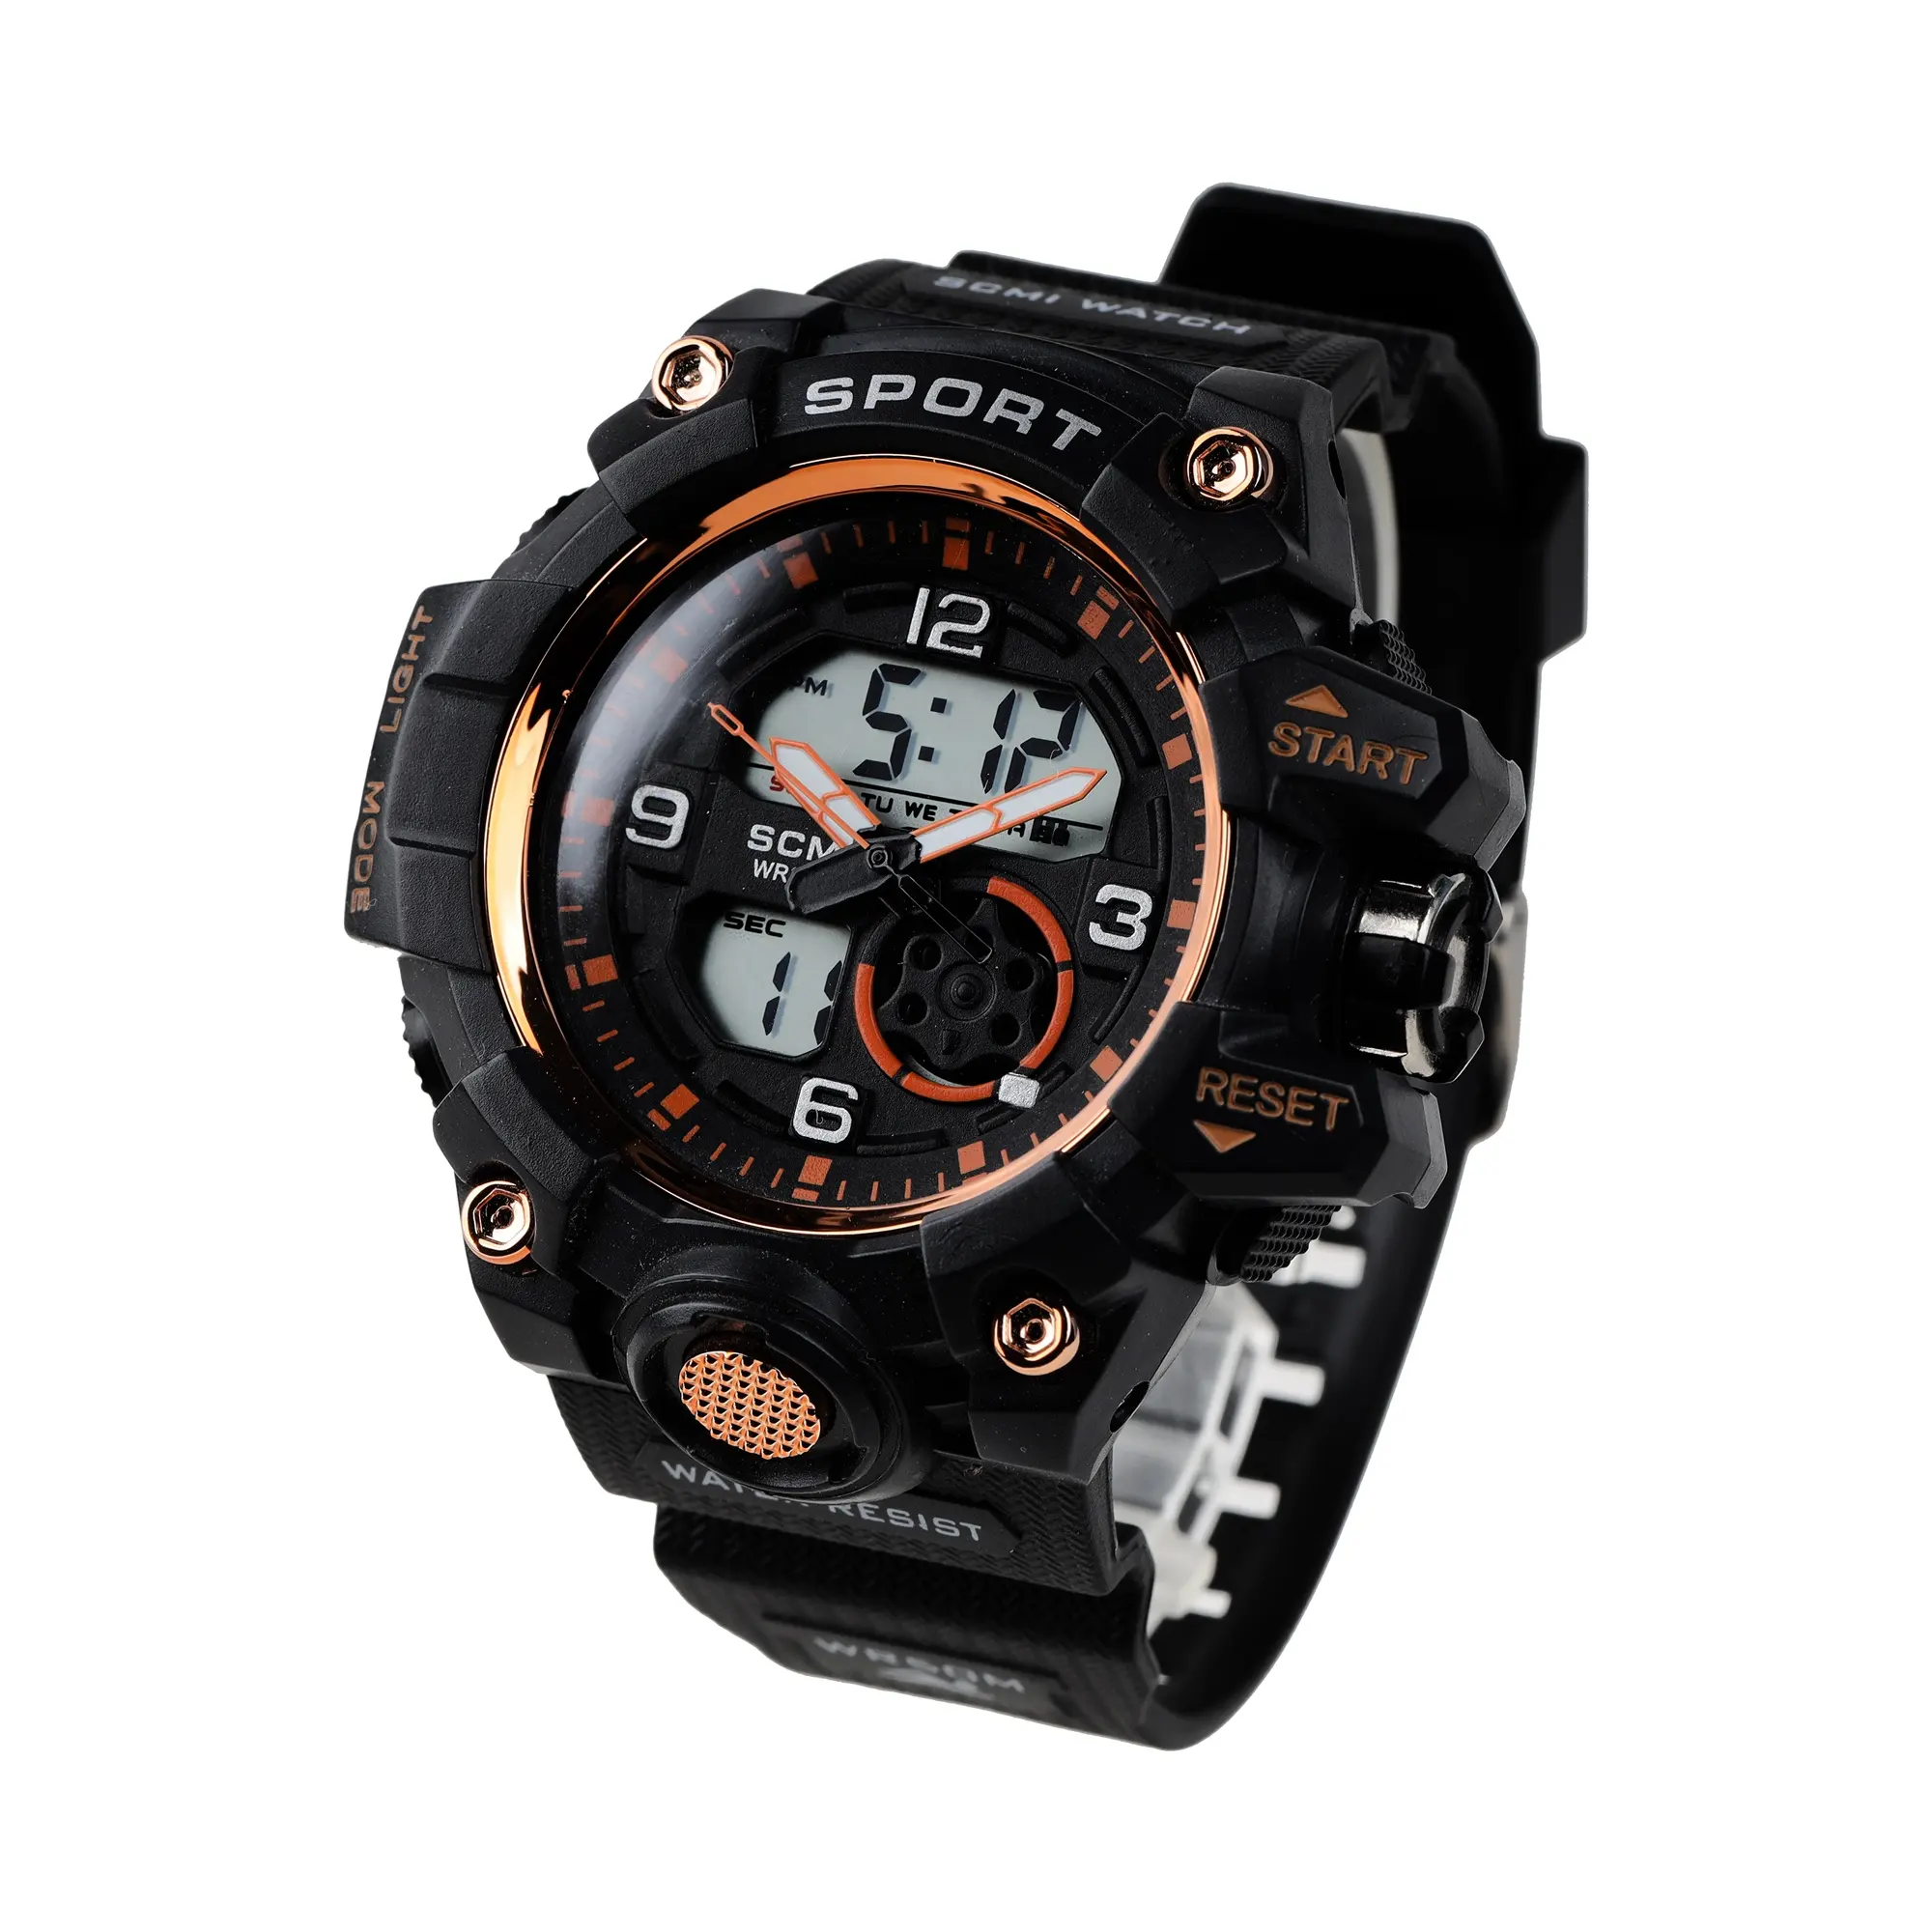 Hot sale Top Sale High Quality Analog Digital Dual Display Waterproof Sport Watches For Men Cheap